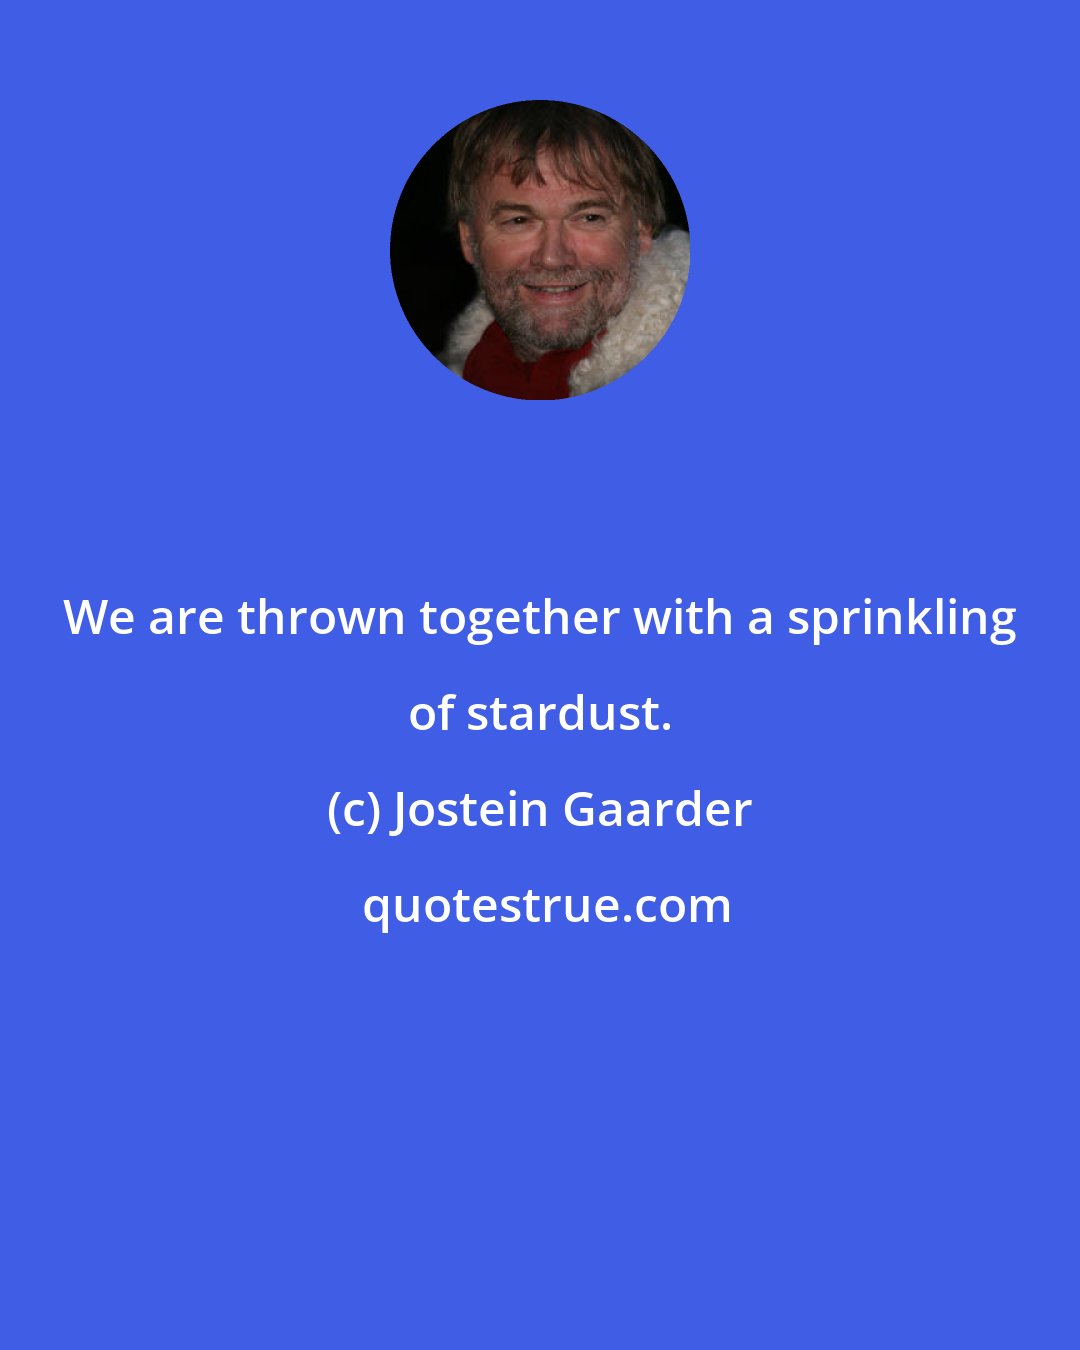 Jostein Gaarder: We are thrown together with a sprinkling of stardust.